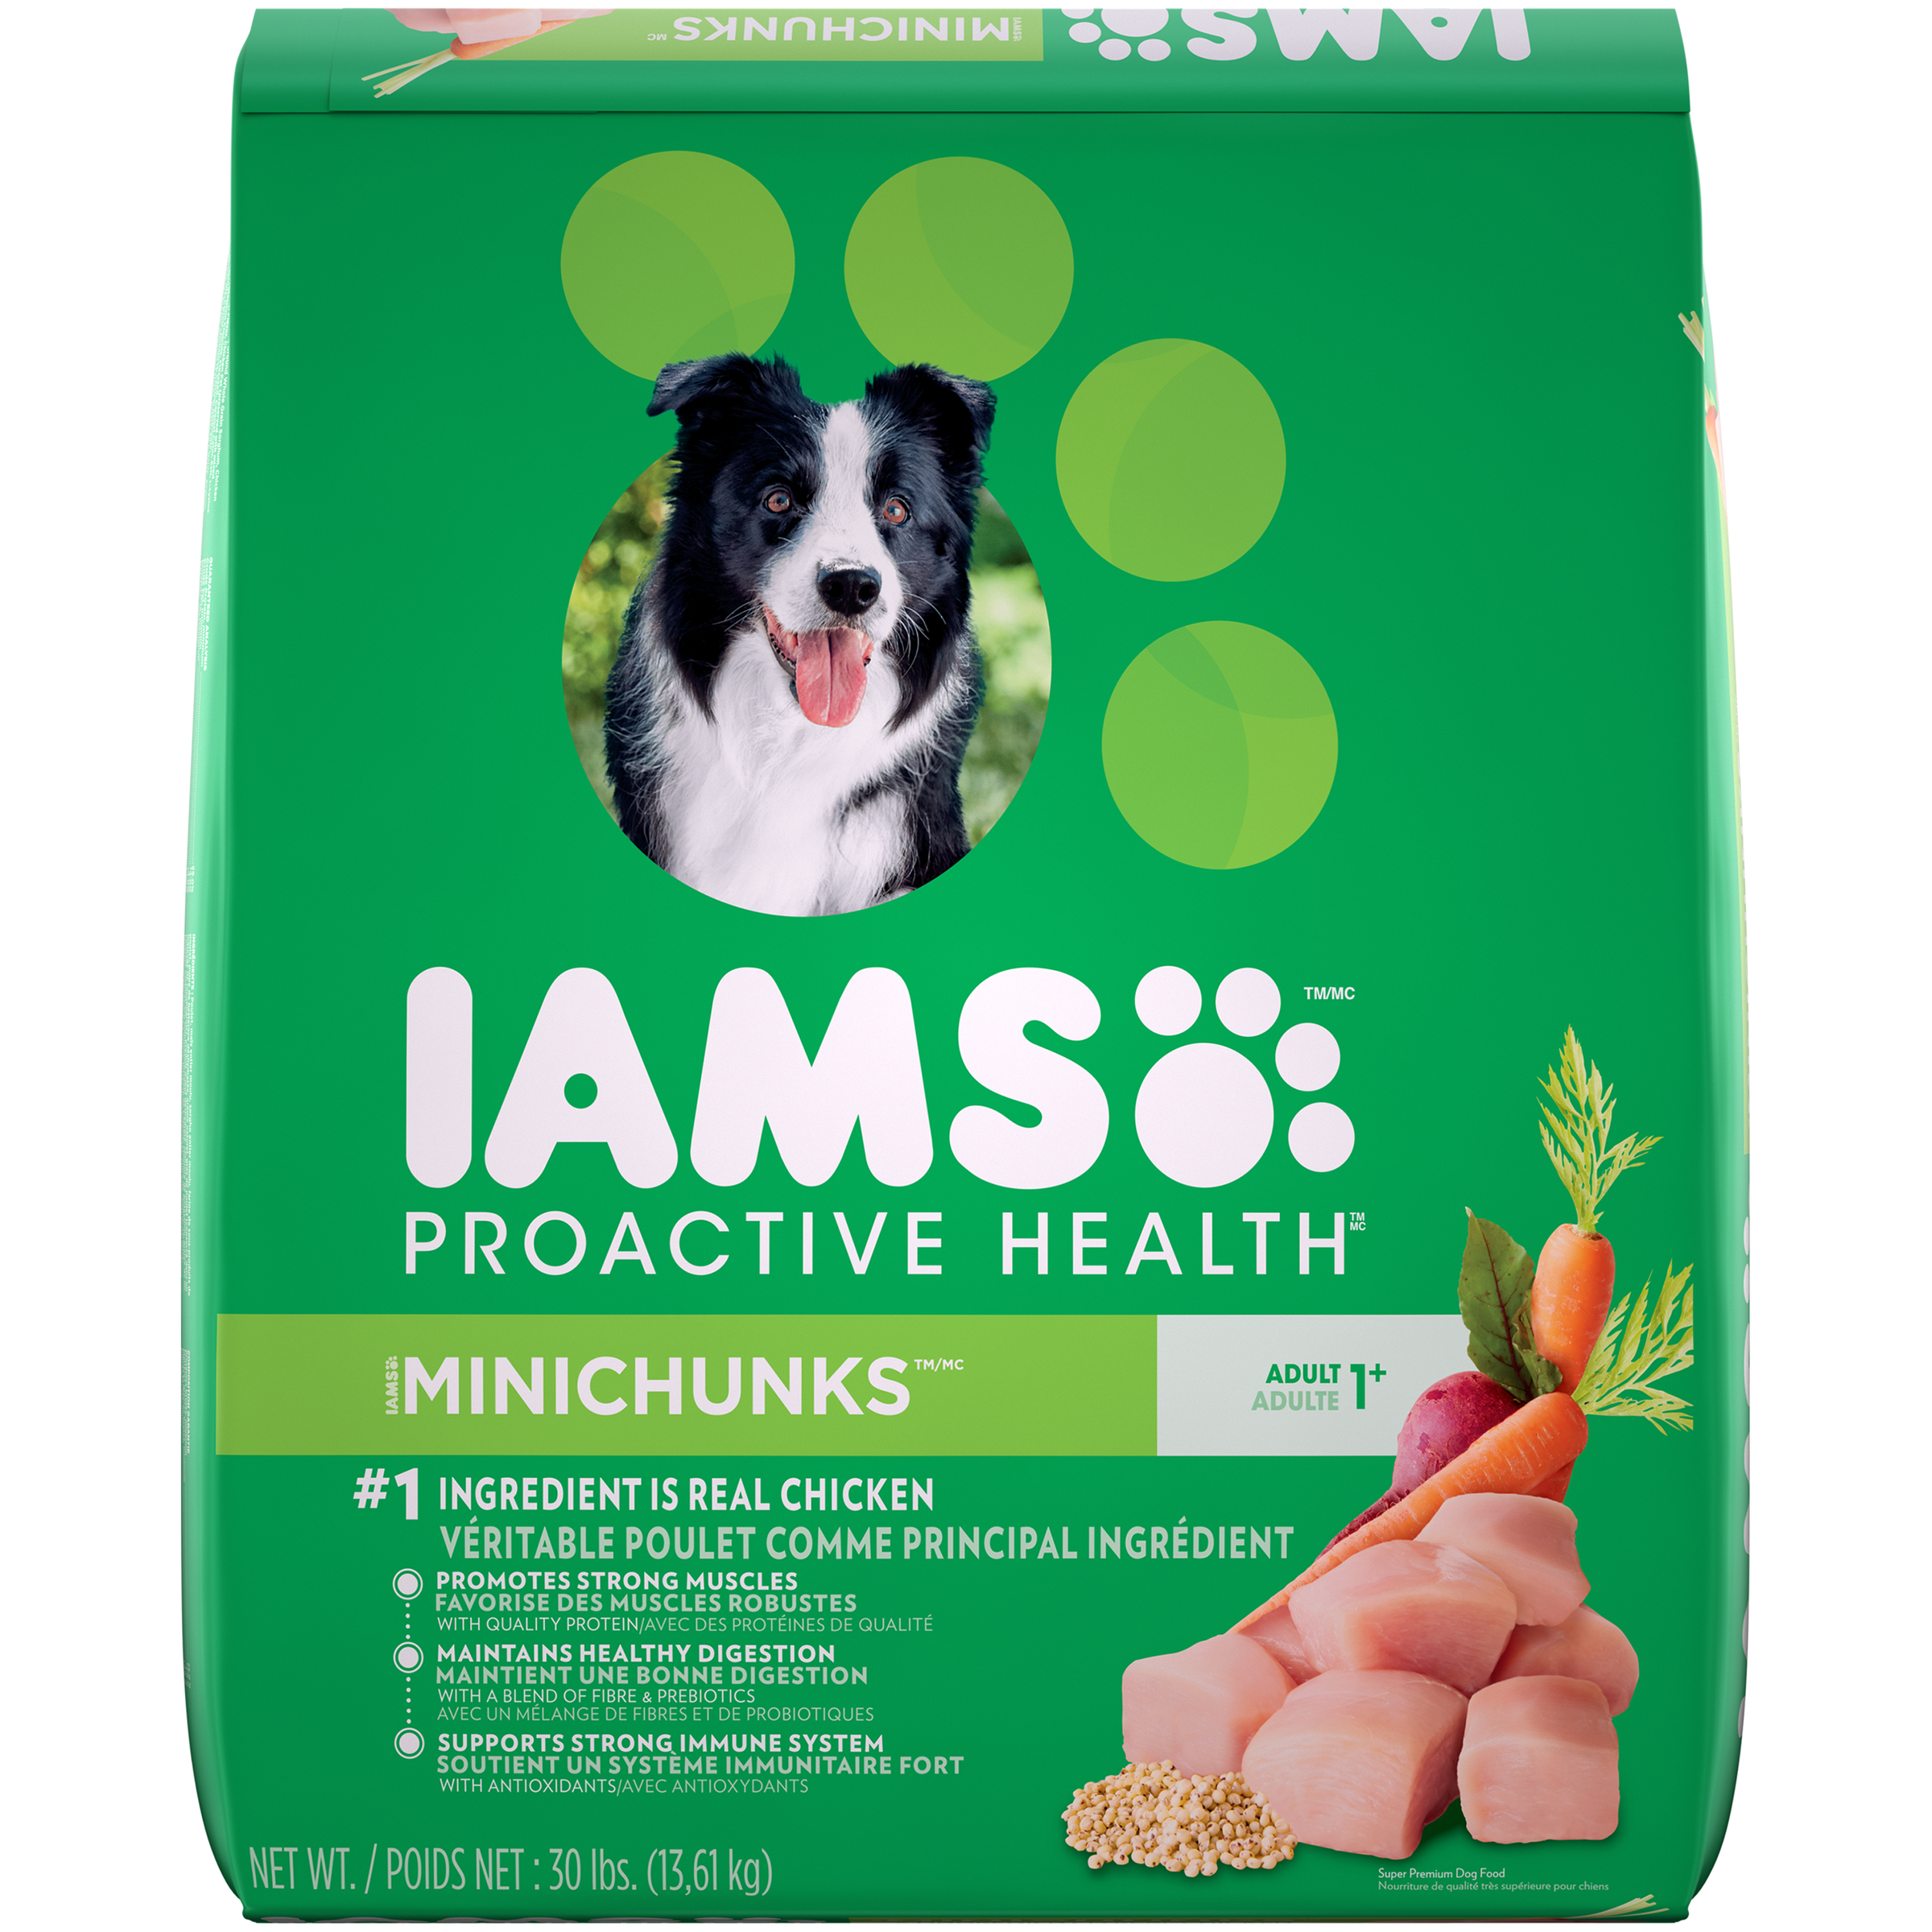 Find The Perfect Iams Dog Food For Your Furry Friend Our Top 10 Picks 